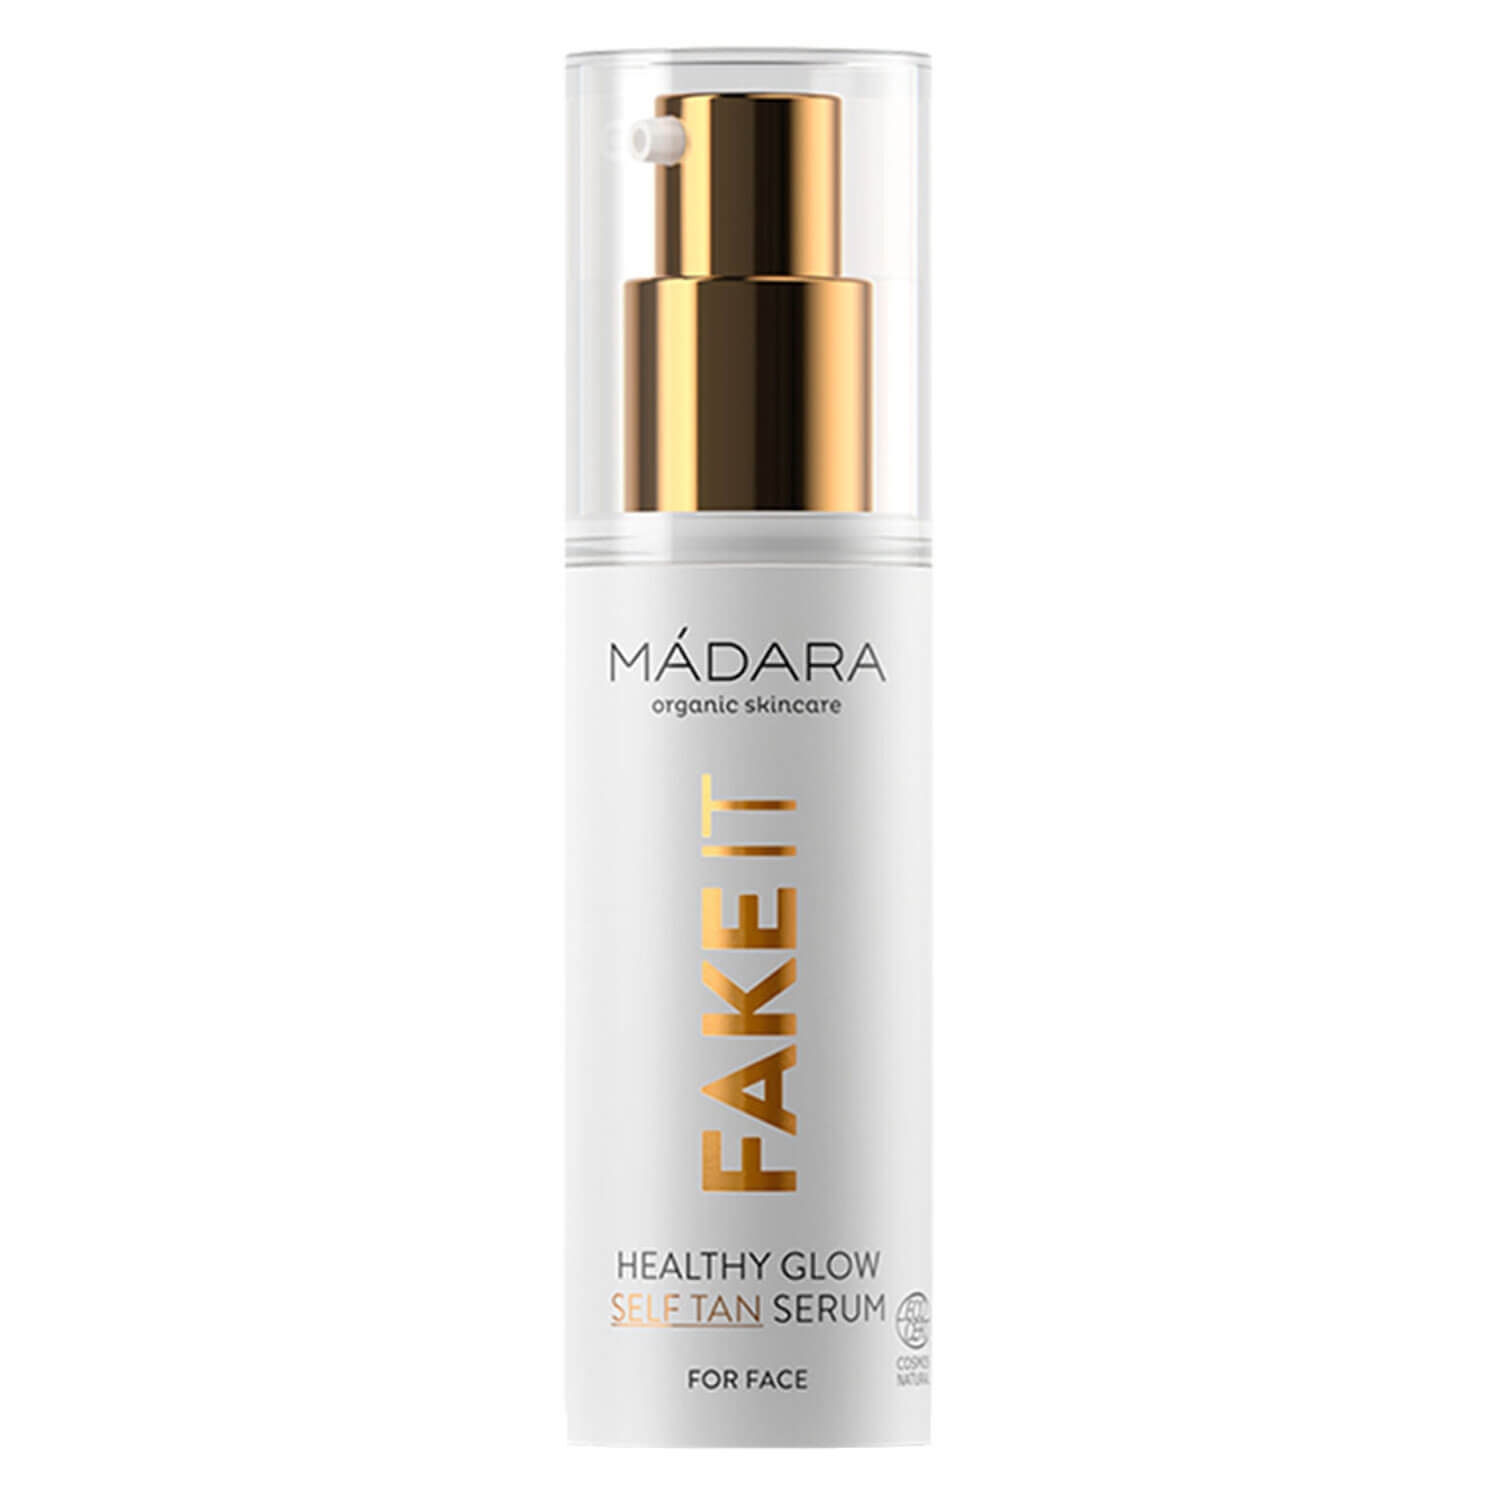 Product image from MÁDARA Care - Fake It Healthy Glow Self Tan Serum For Face